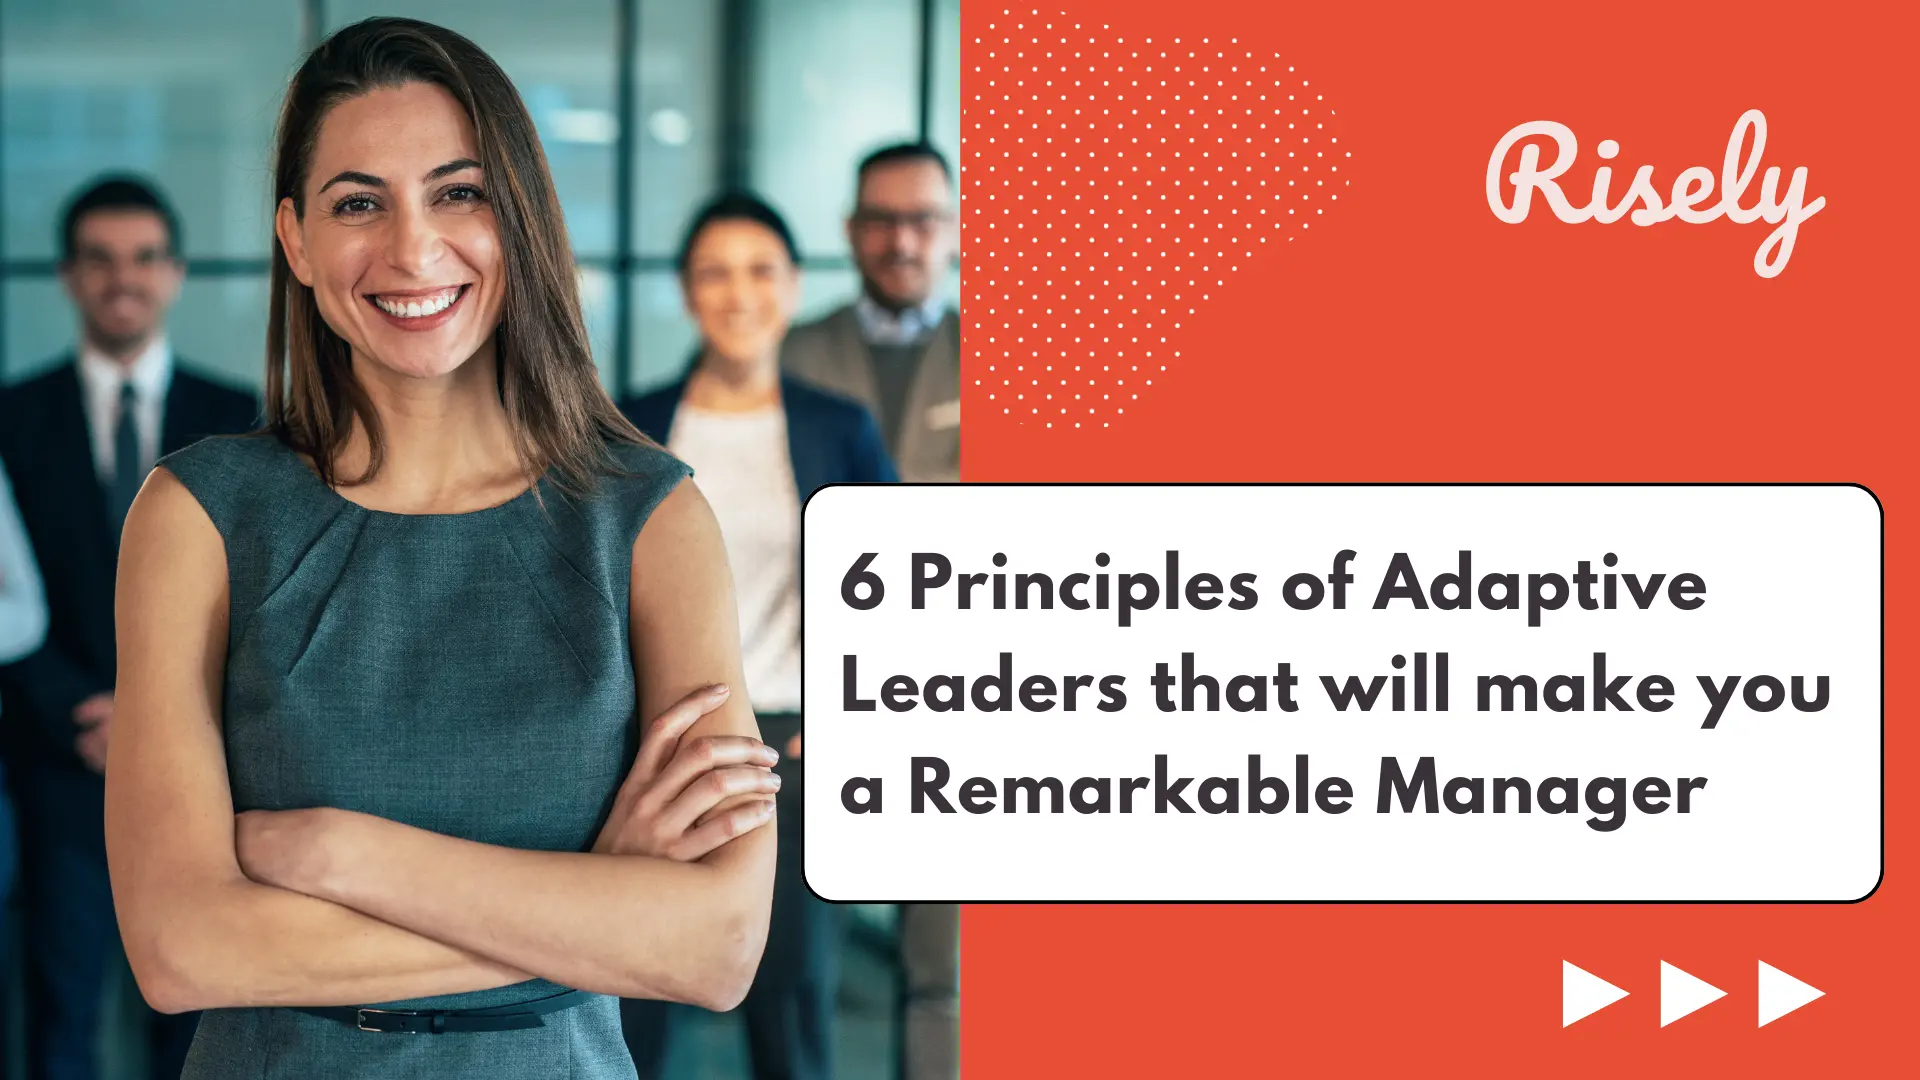 6 Principles of Adaptive Leaders that will make you a Remarkable Manager